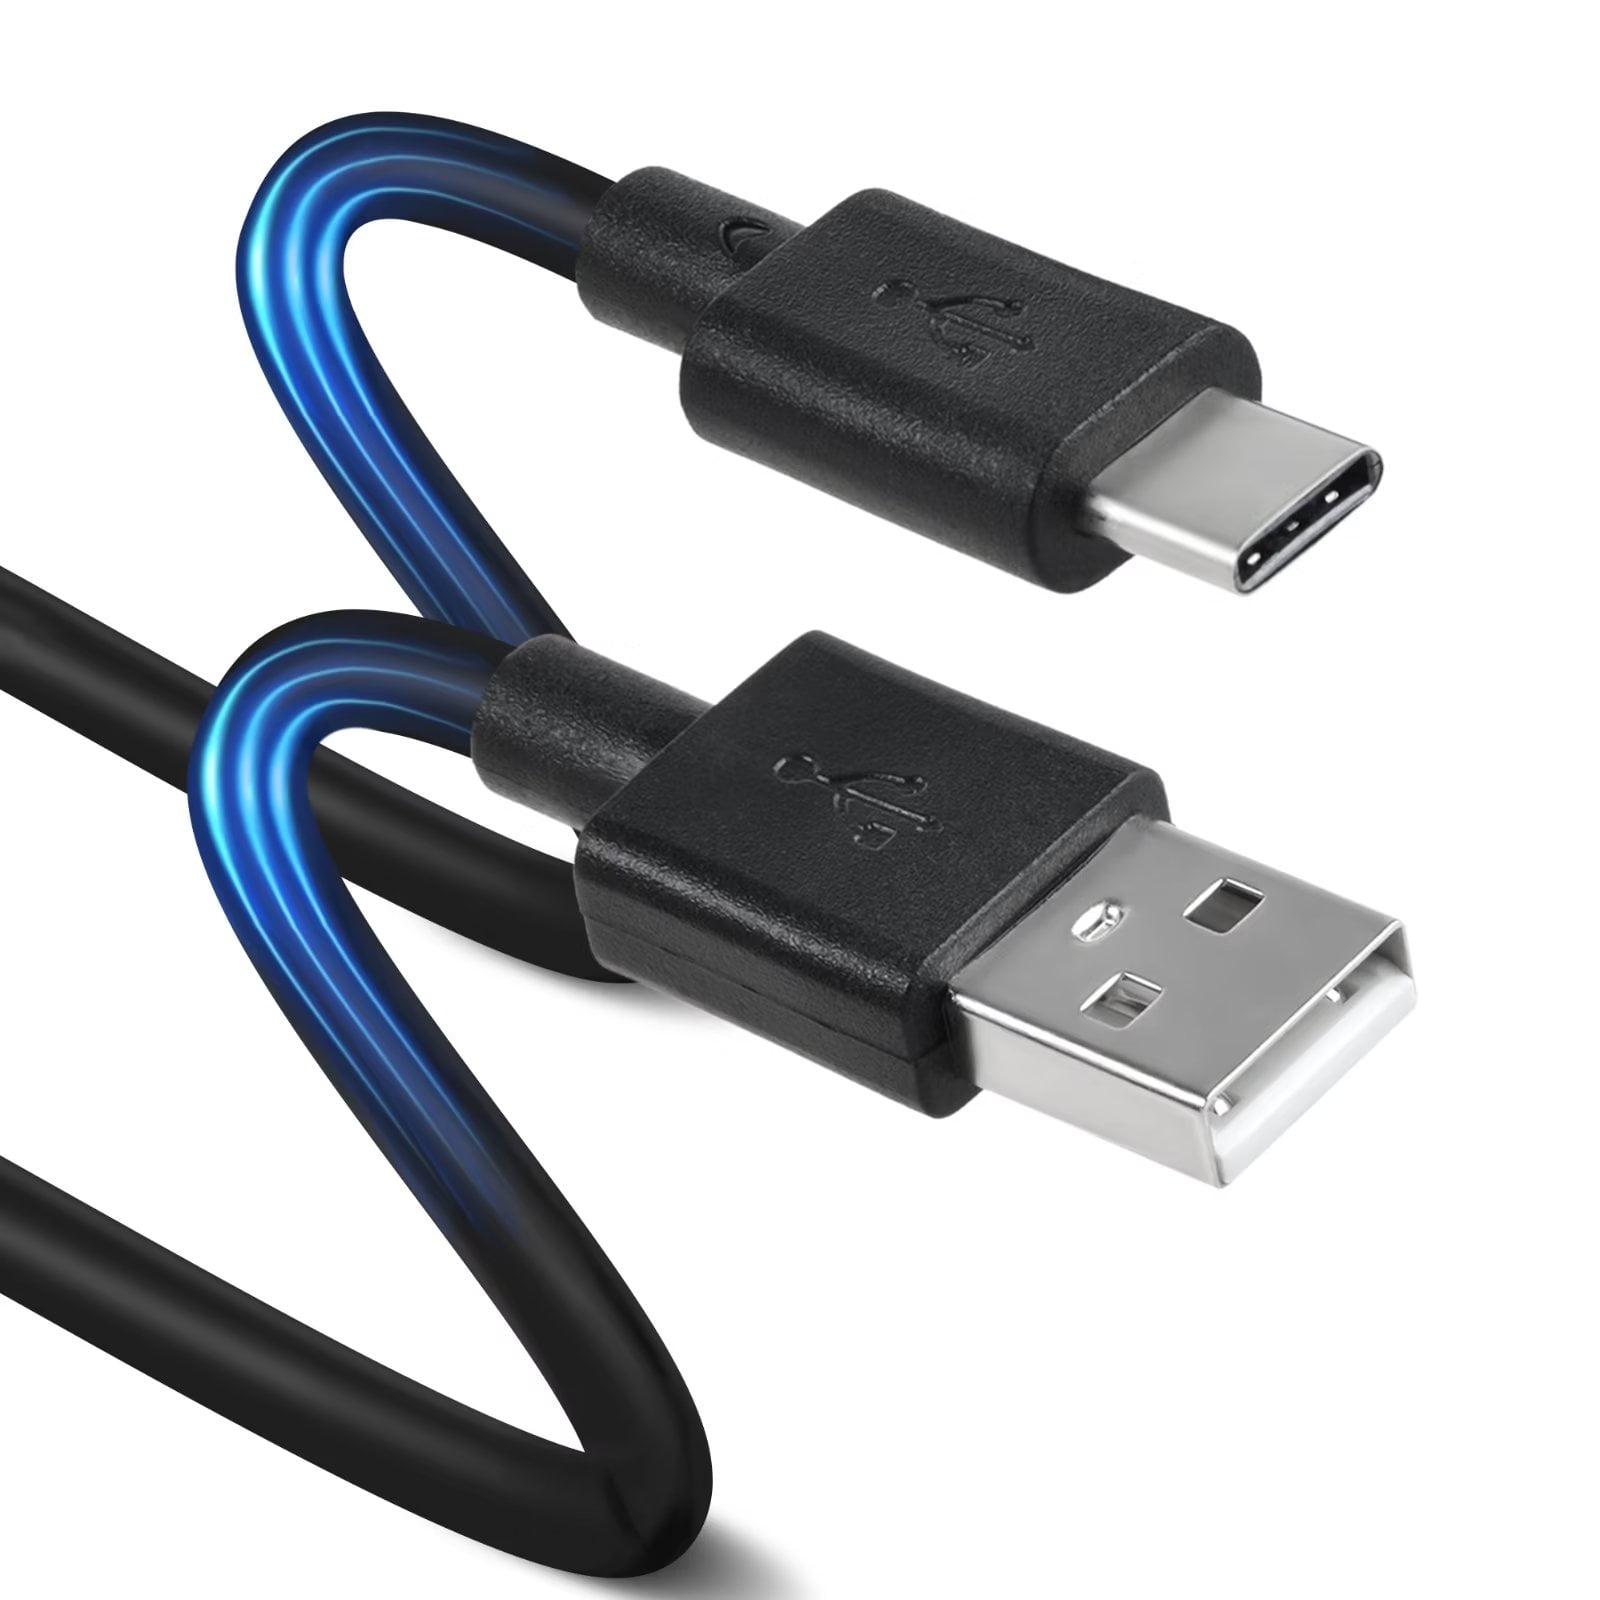 Black USB-C Type-C PSU Charger Cable Cord Lead for Xperia X Compact F5321 Walmart.com